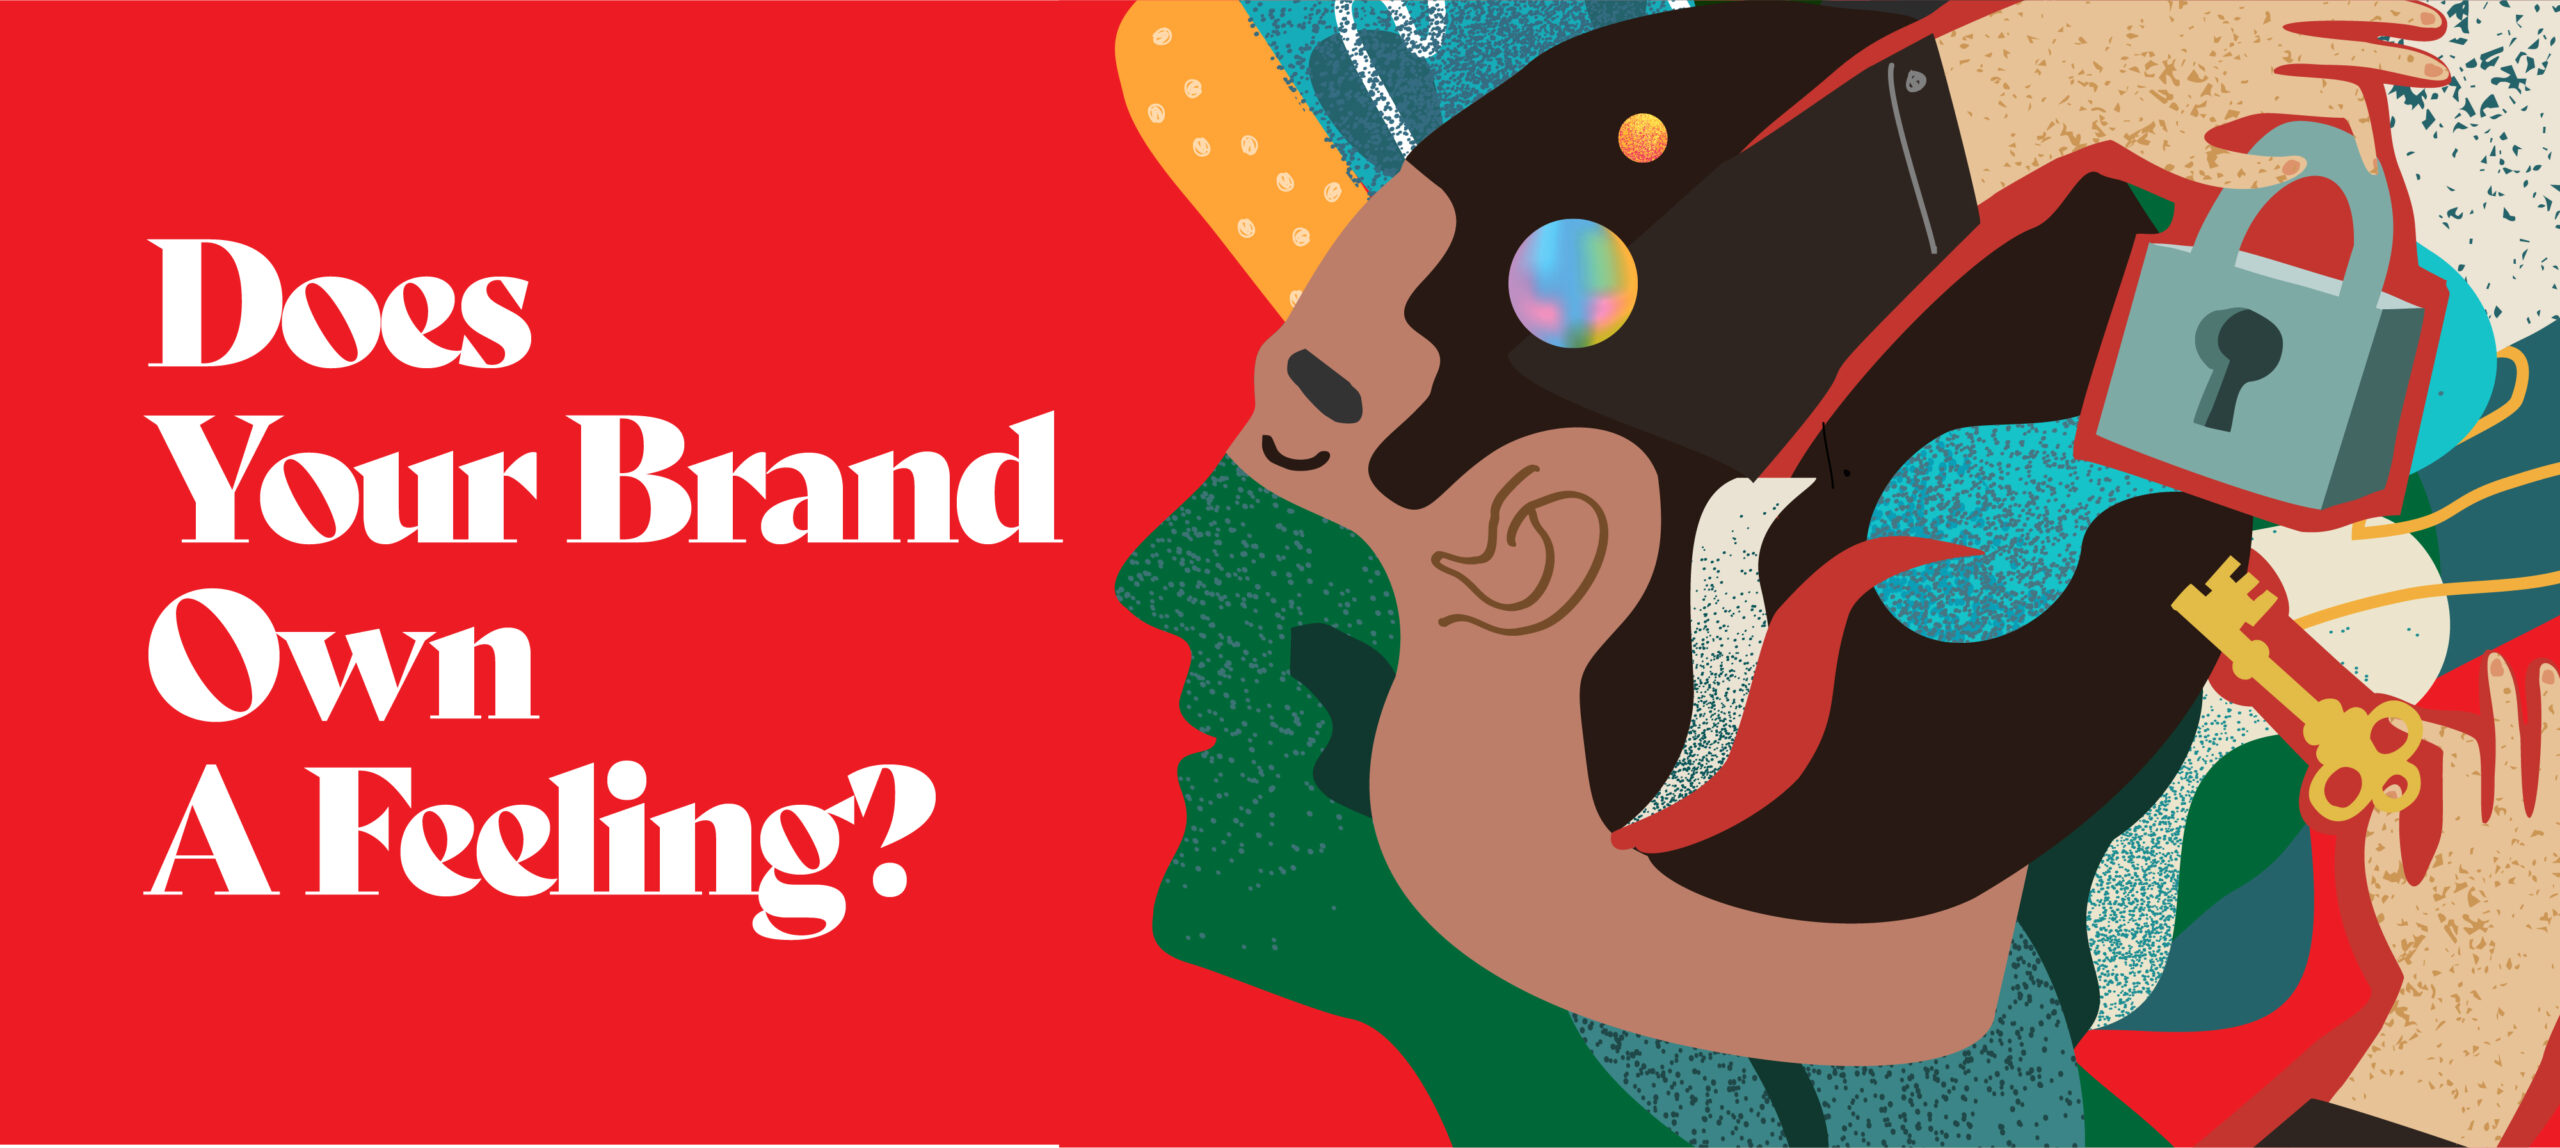 Does your brand own a feeling?